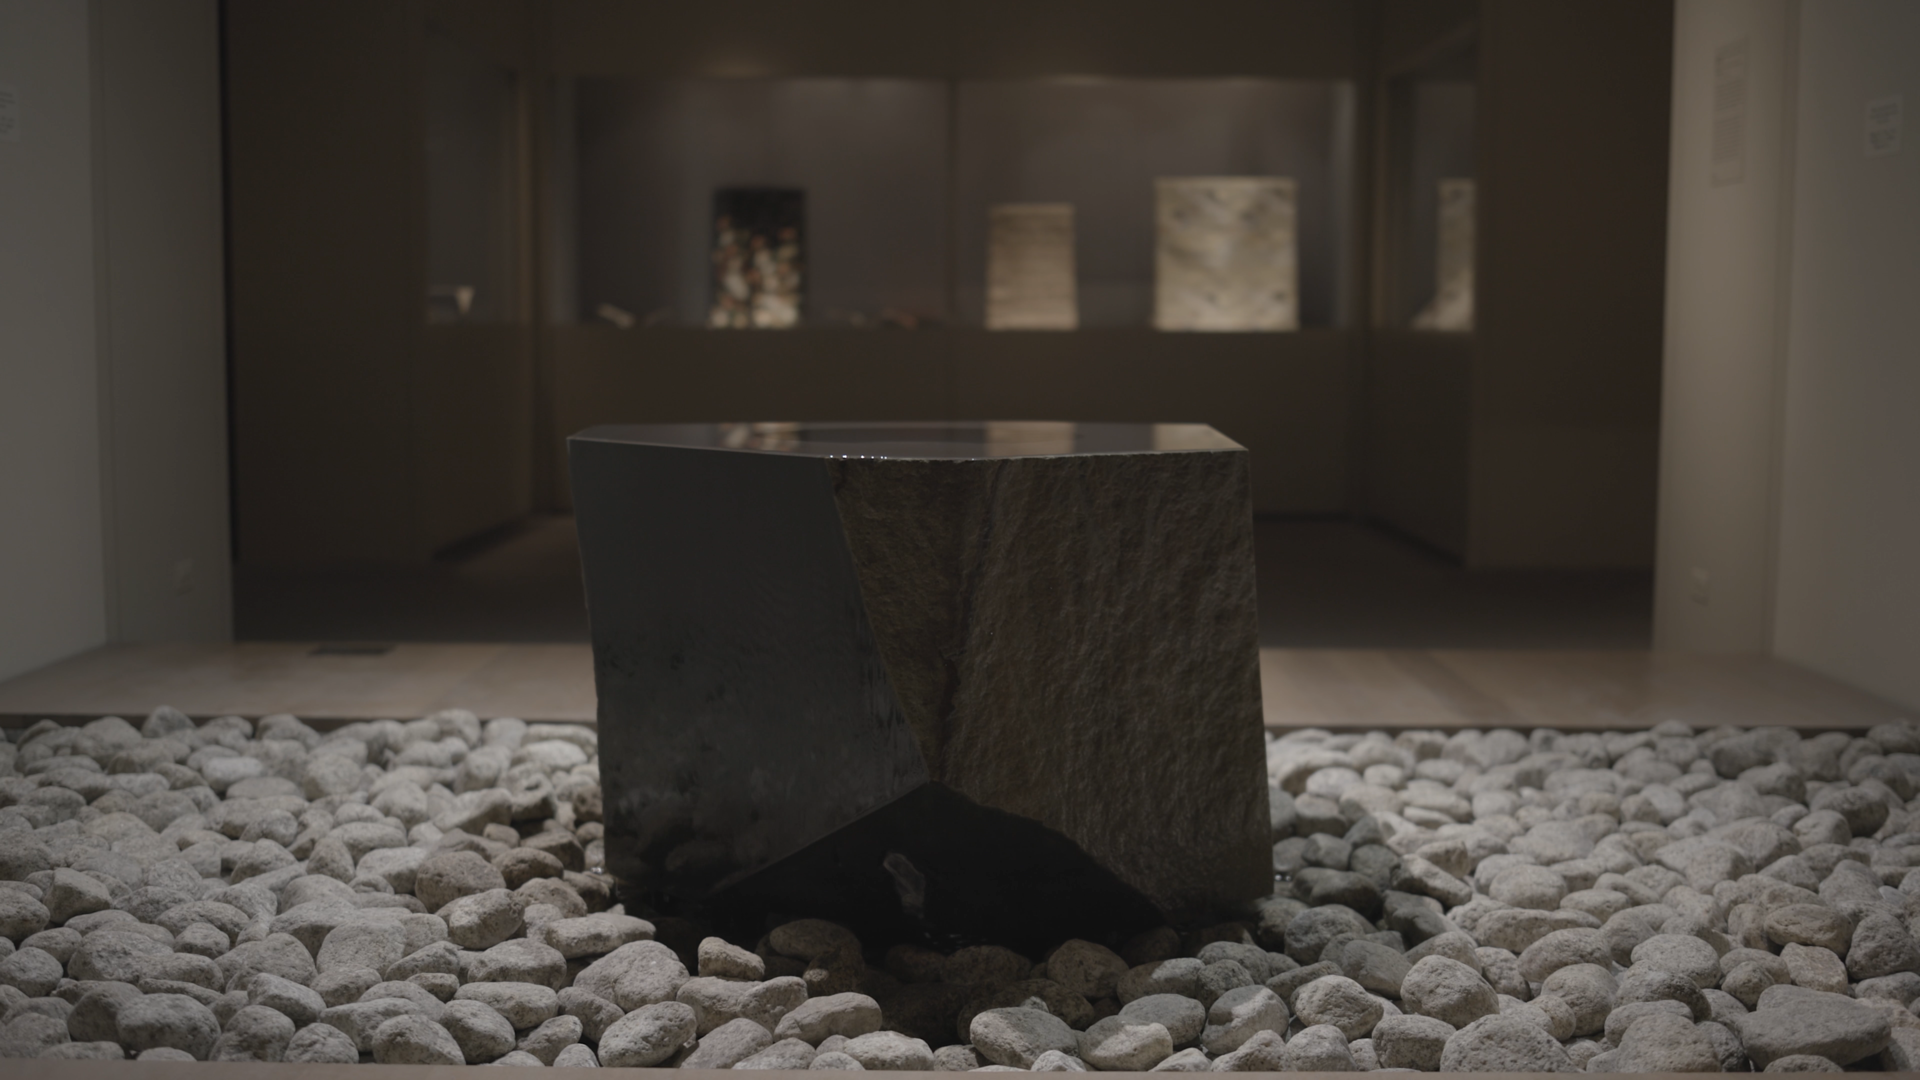 Isamu Noguchi's Water Stone fountain sculpture, located in gallery 229 at The Met Fifth Avenue